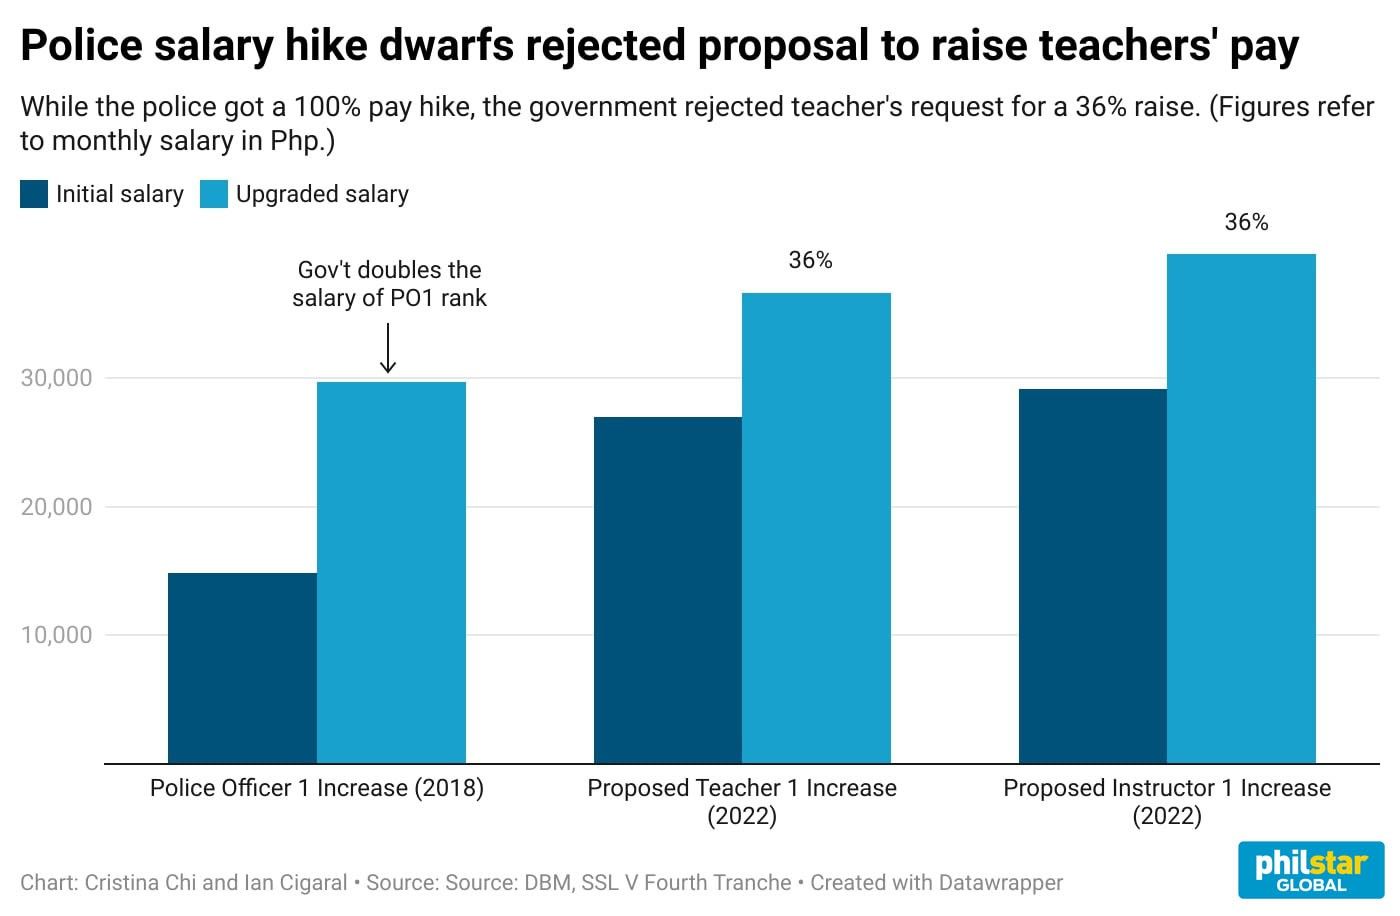 2mm22 Police Salary Hike Dwarfs Rejected Proposal Raise Teachers Pay 2023 02 23 17 52 15 Gallery 